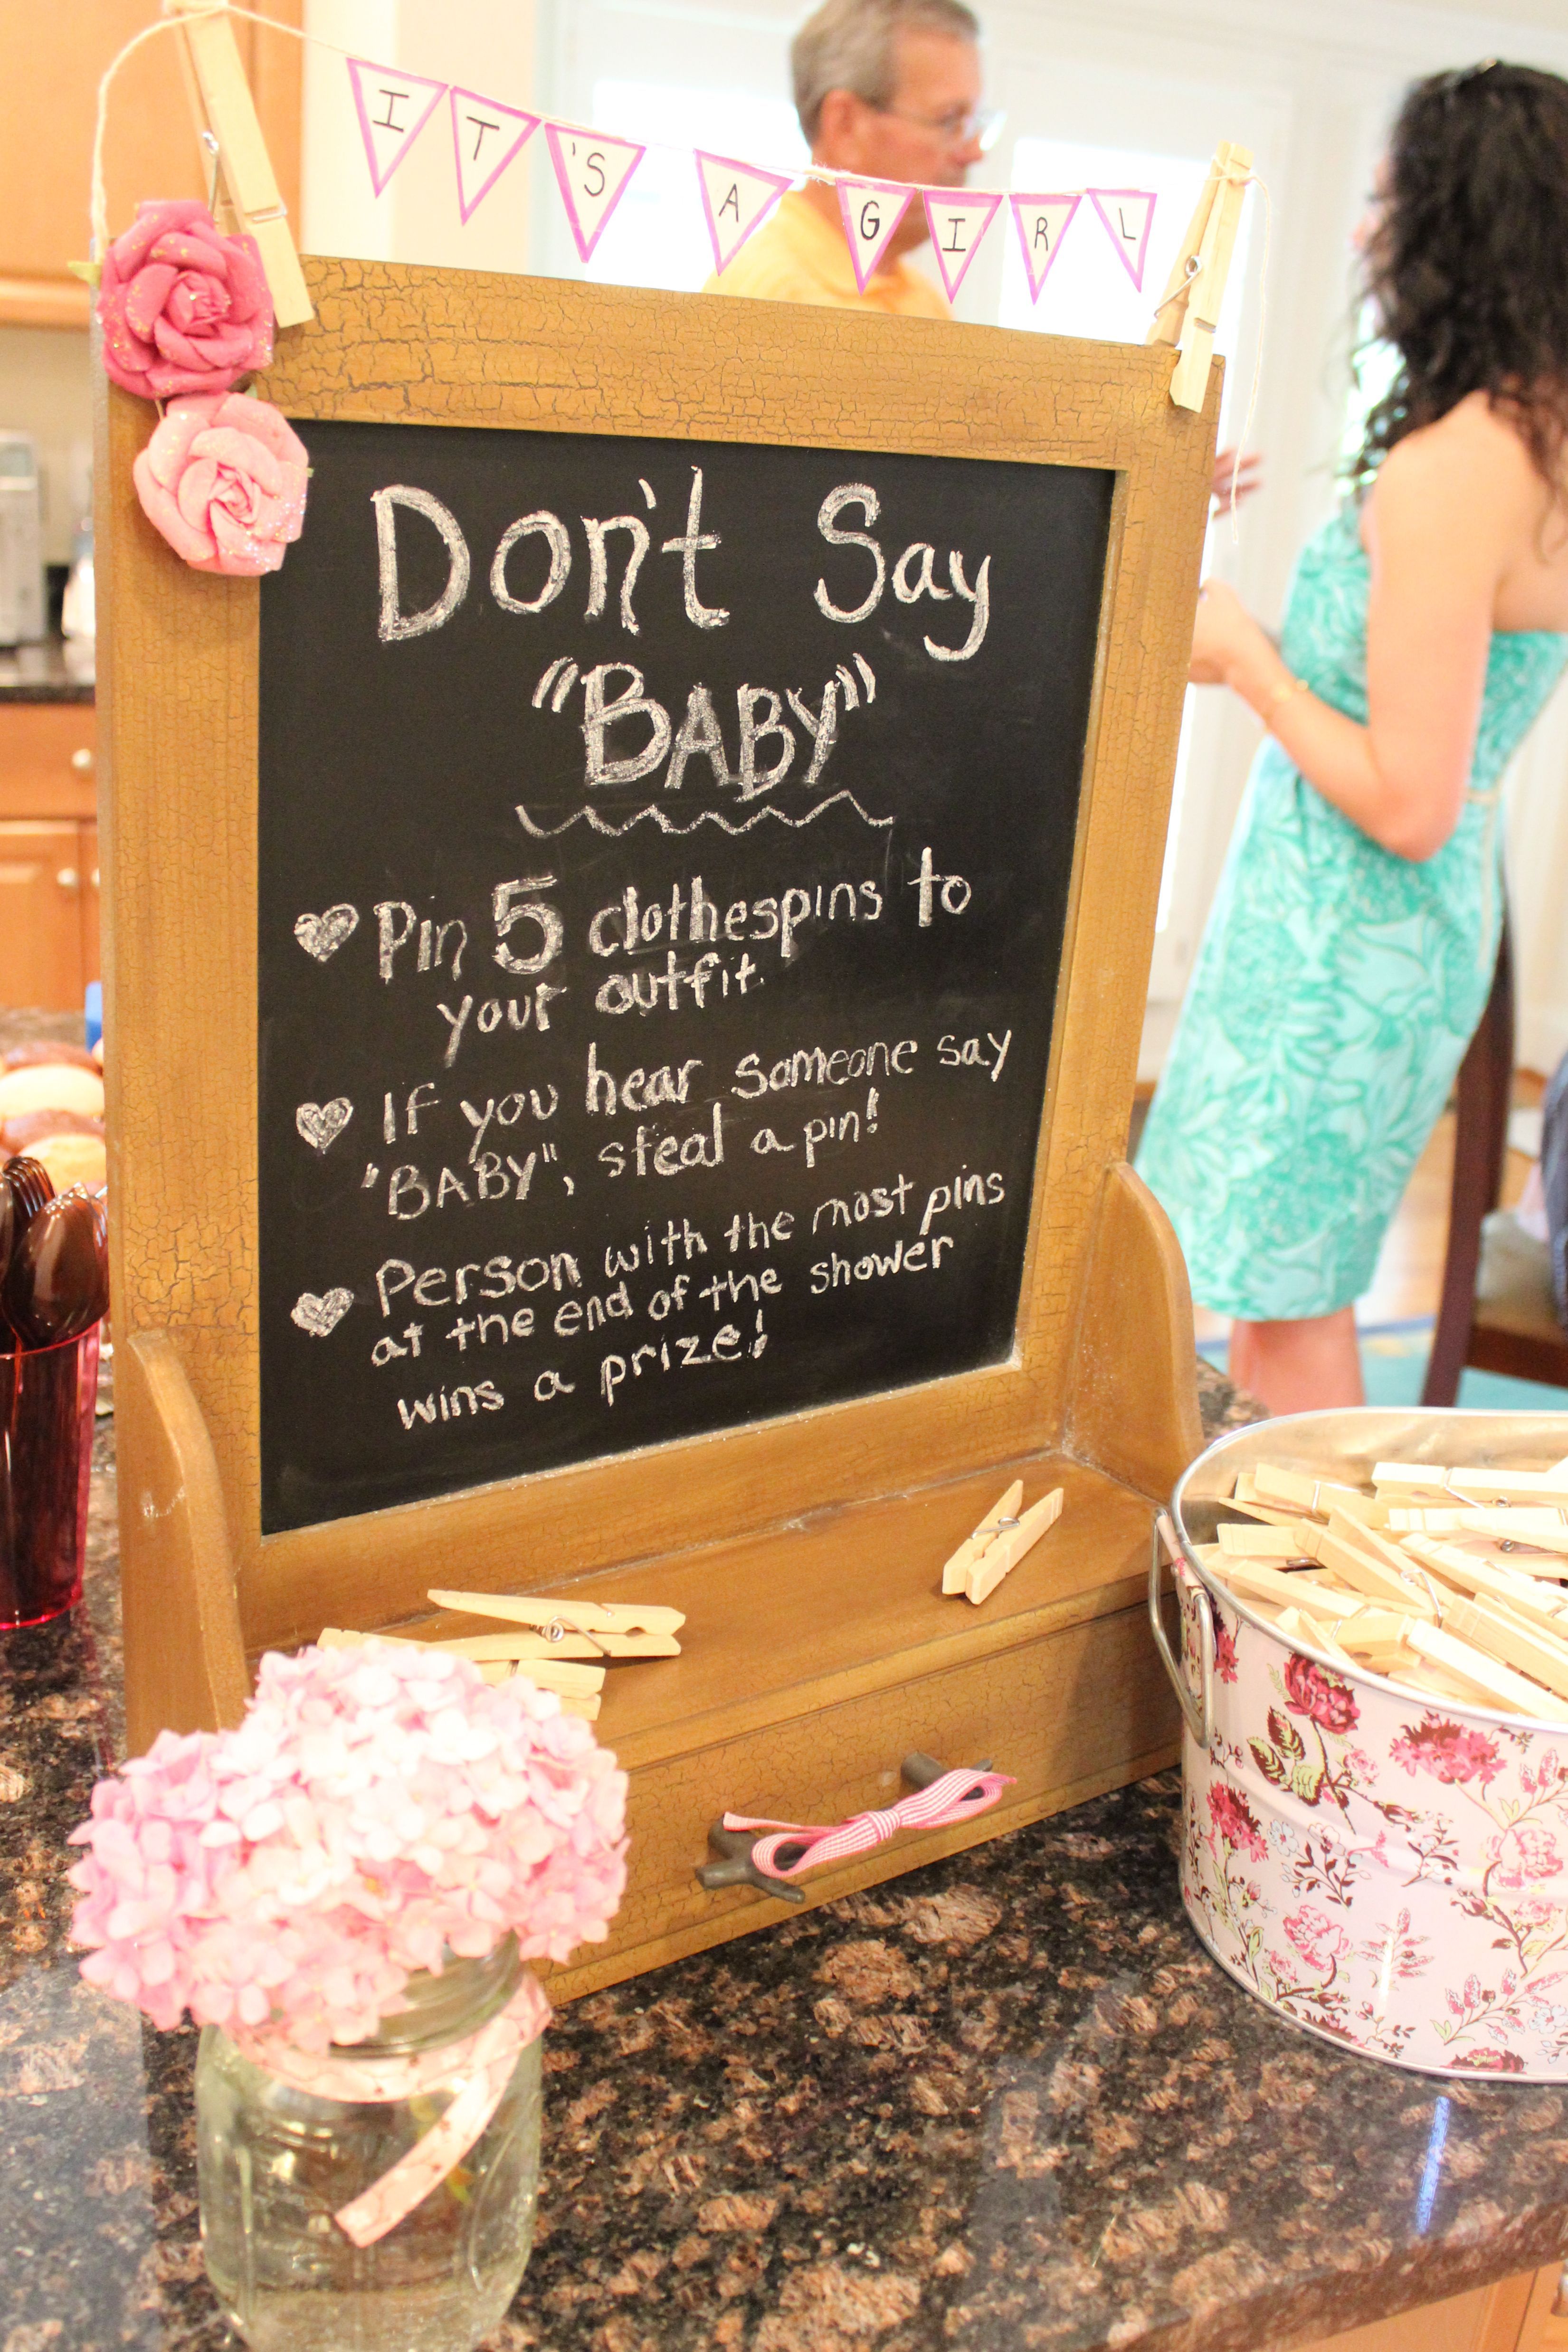 Dont say baby – shower game  I like the idea of a sign and set up.